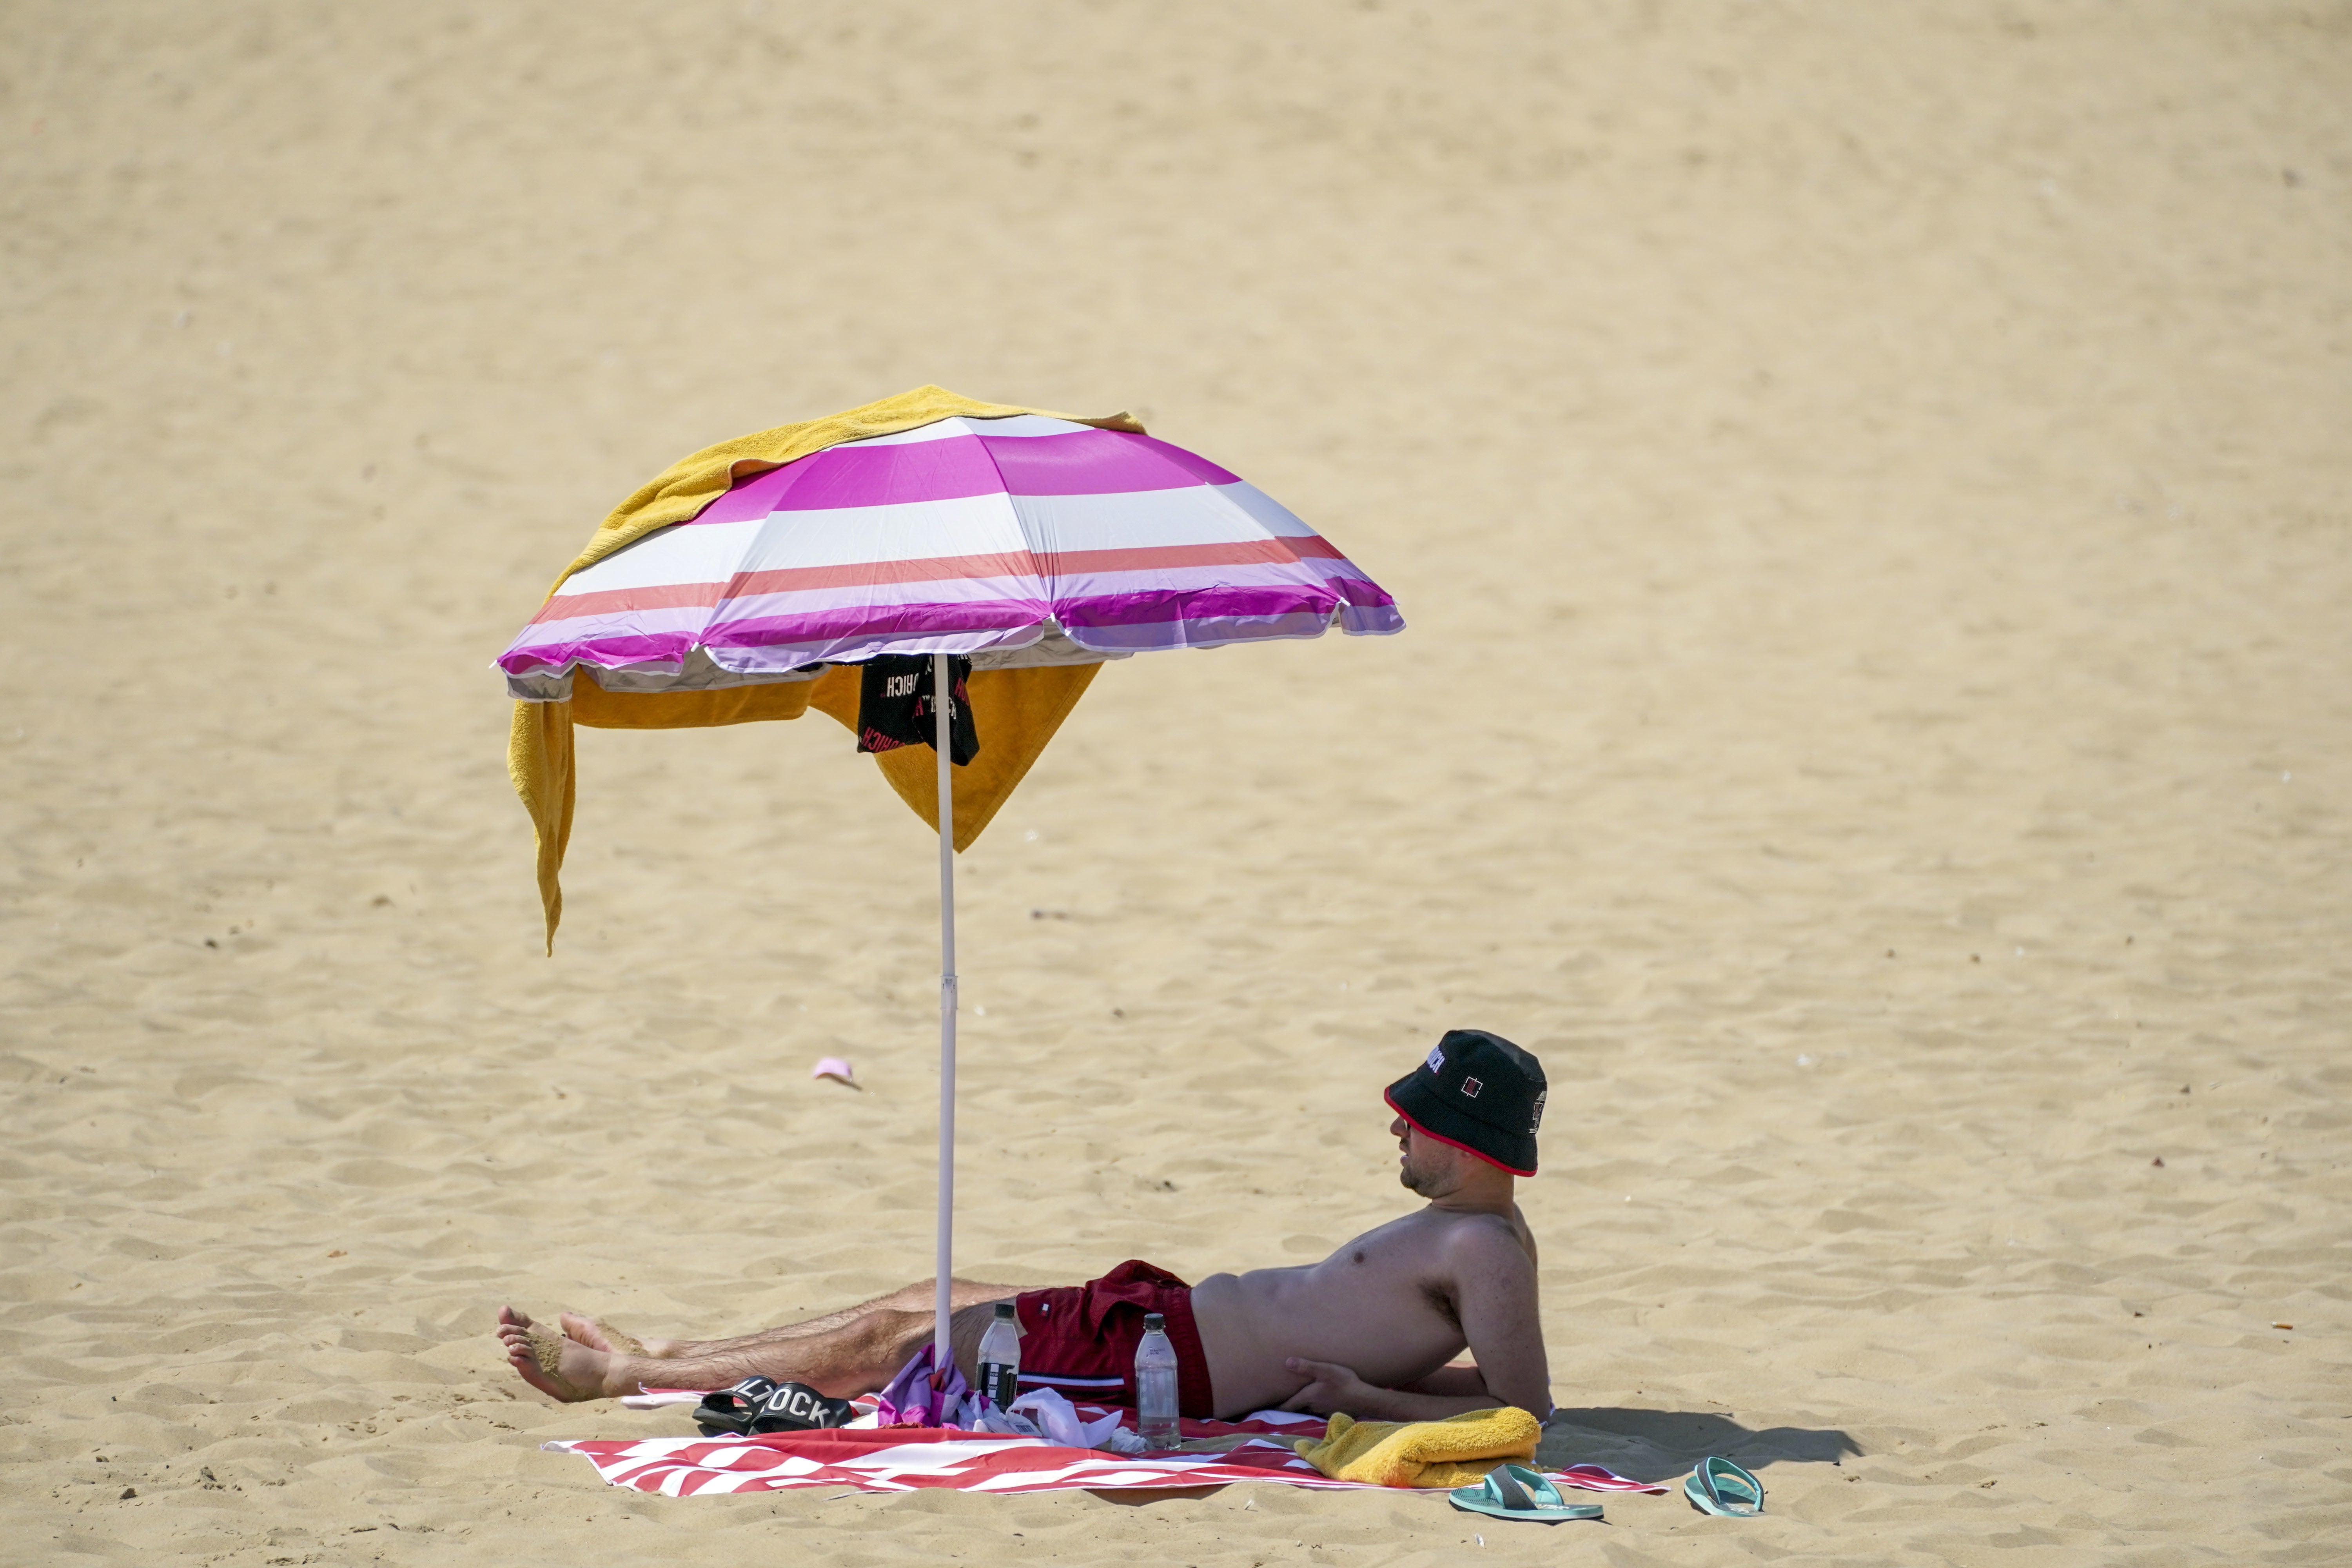 weather, heatwave, the world laughs at britain’s heatwaves – they really shouldn’t